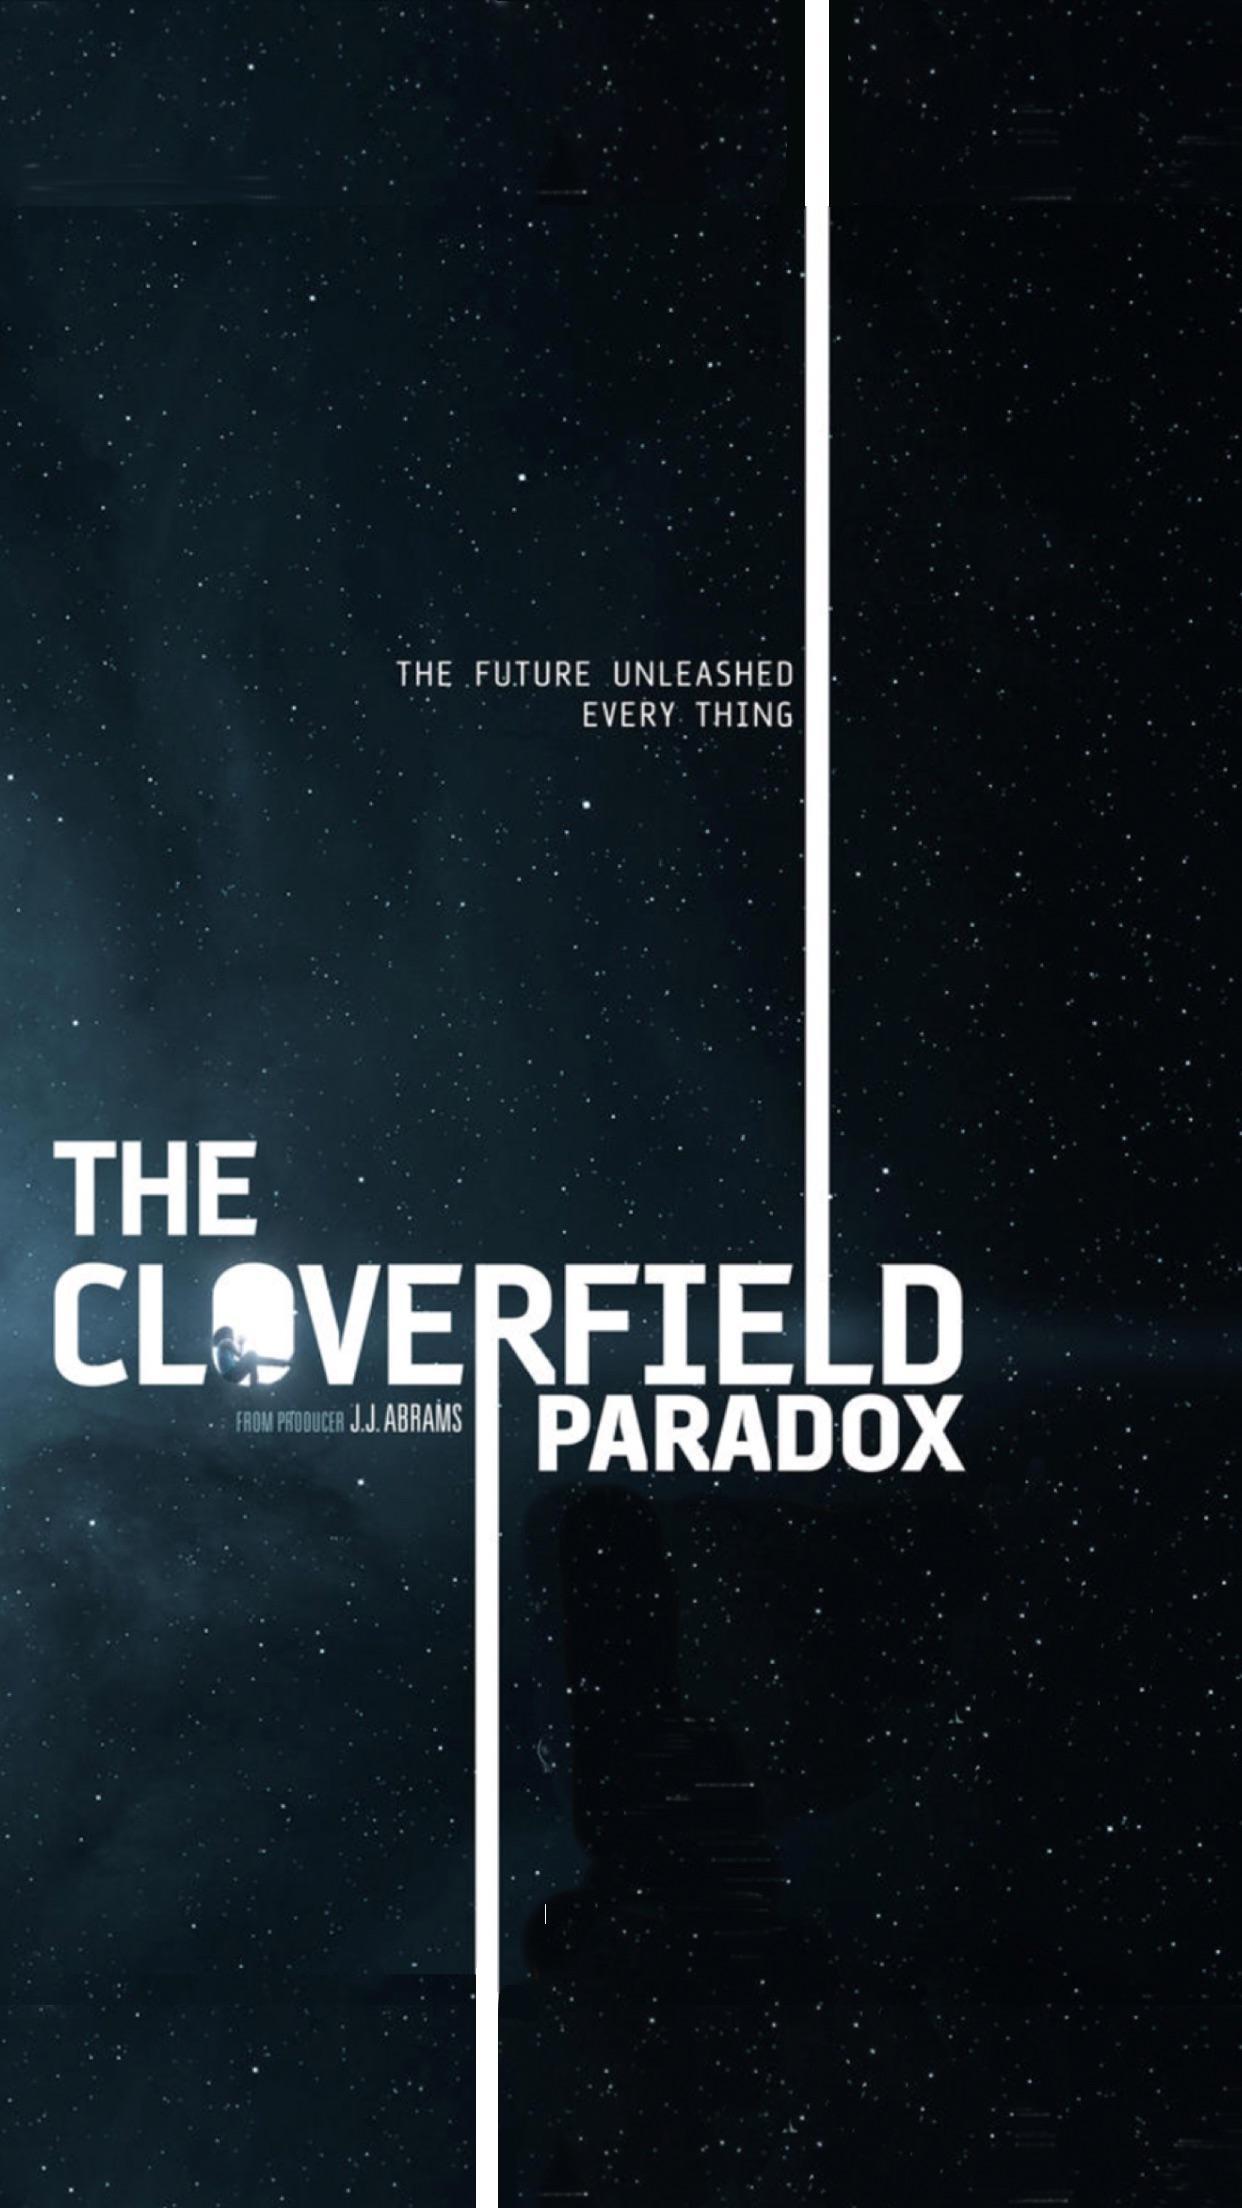 My slightly poorly made Cloverfield Paradox phone wallpaper